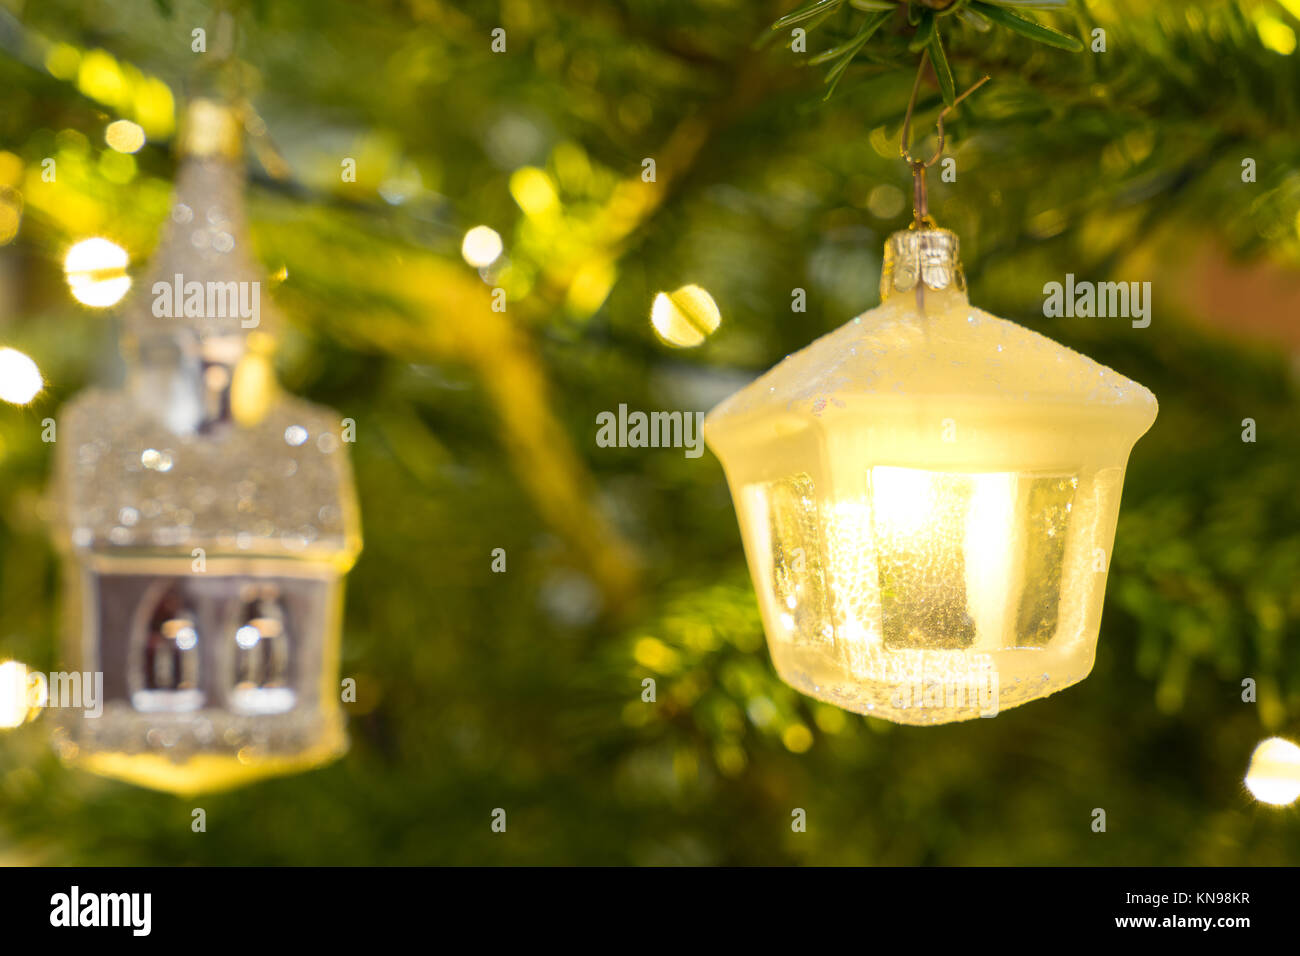 Christmas decoration white and glass lantern hanging in a Nordman christmastree Stock Photo